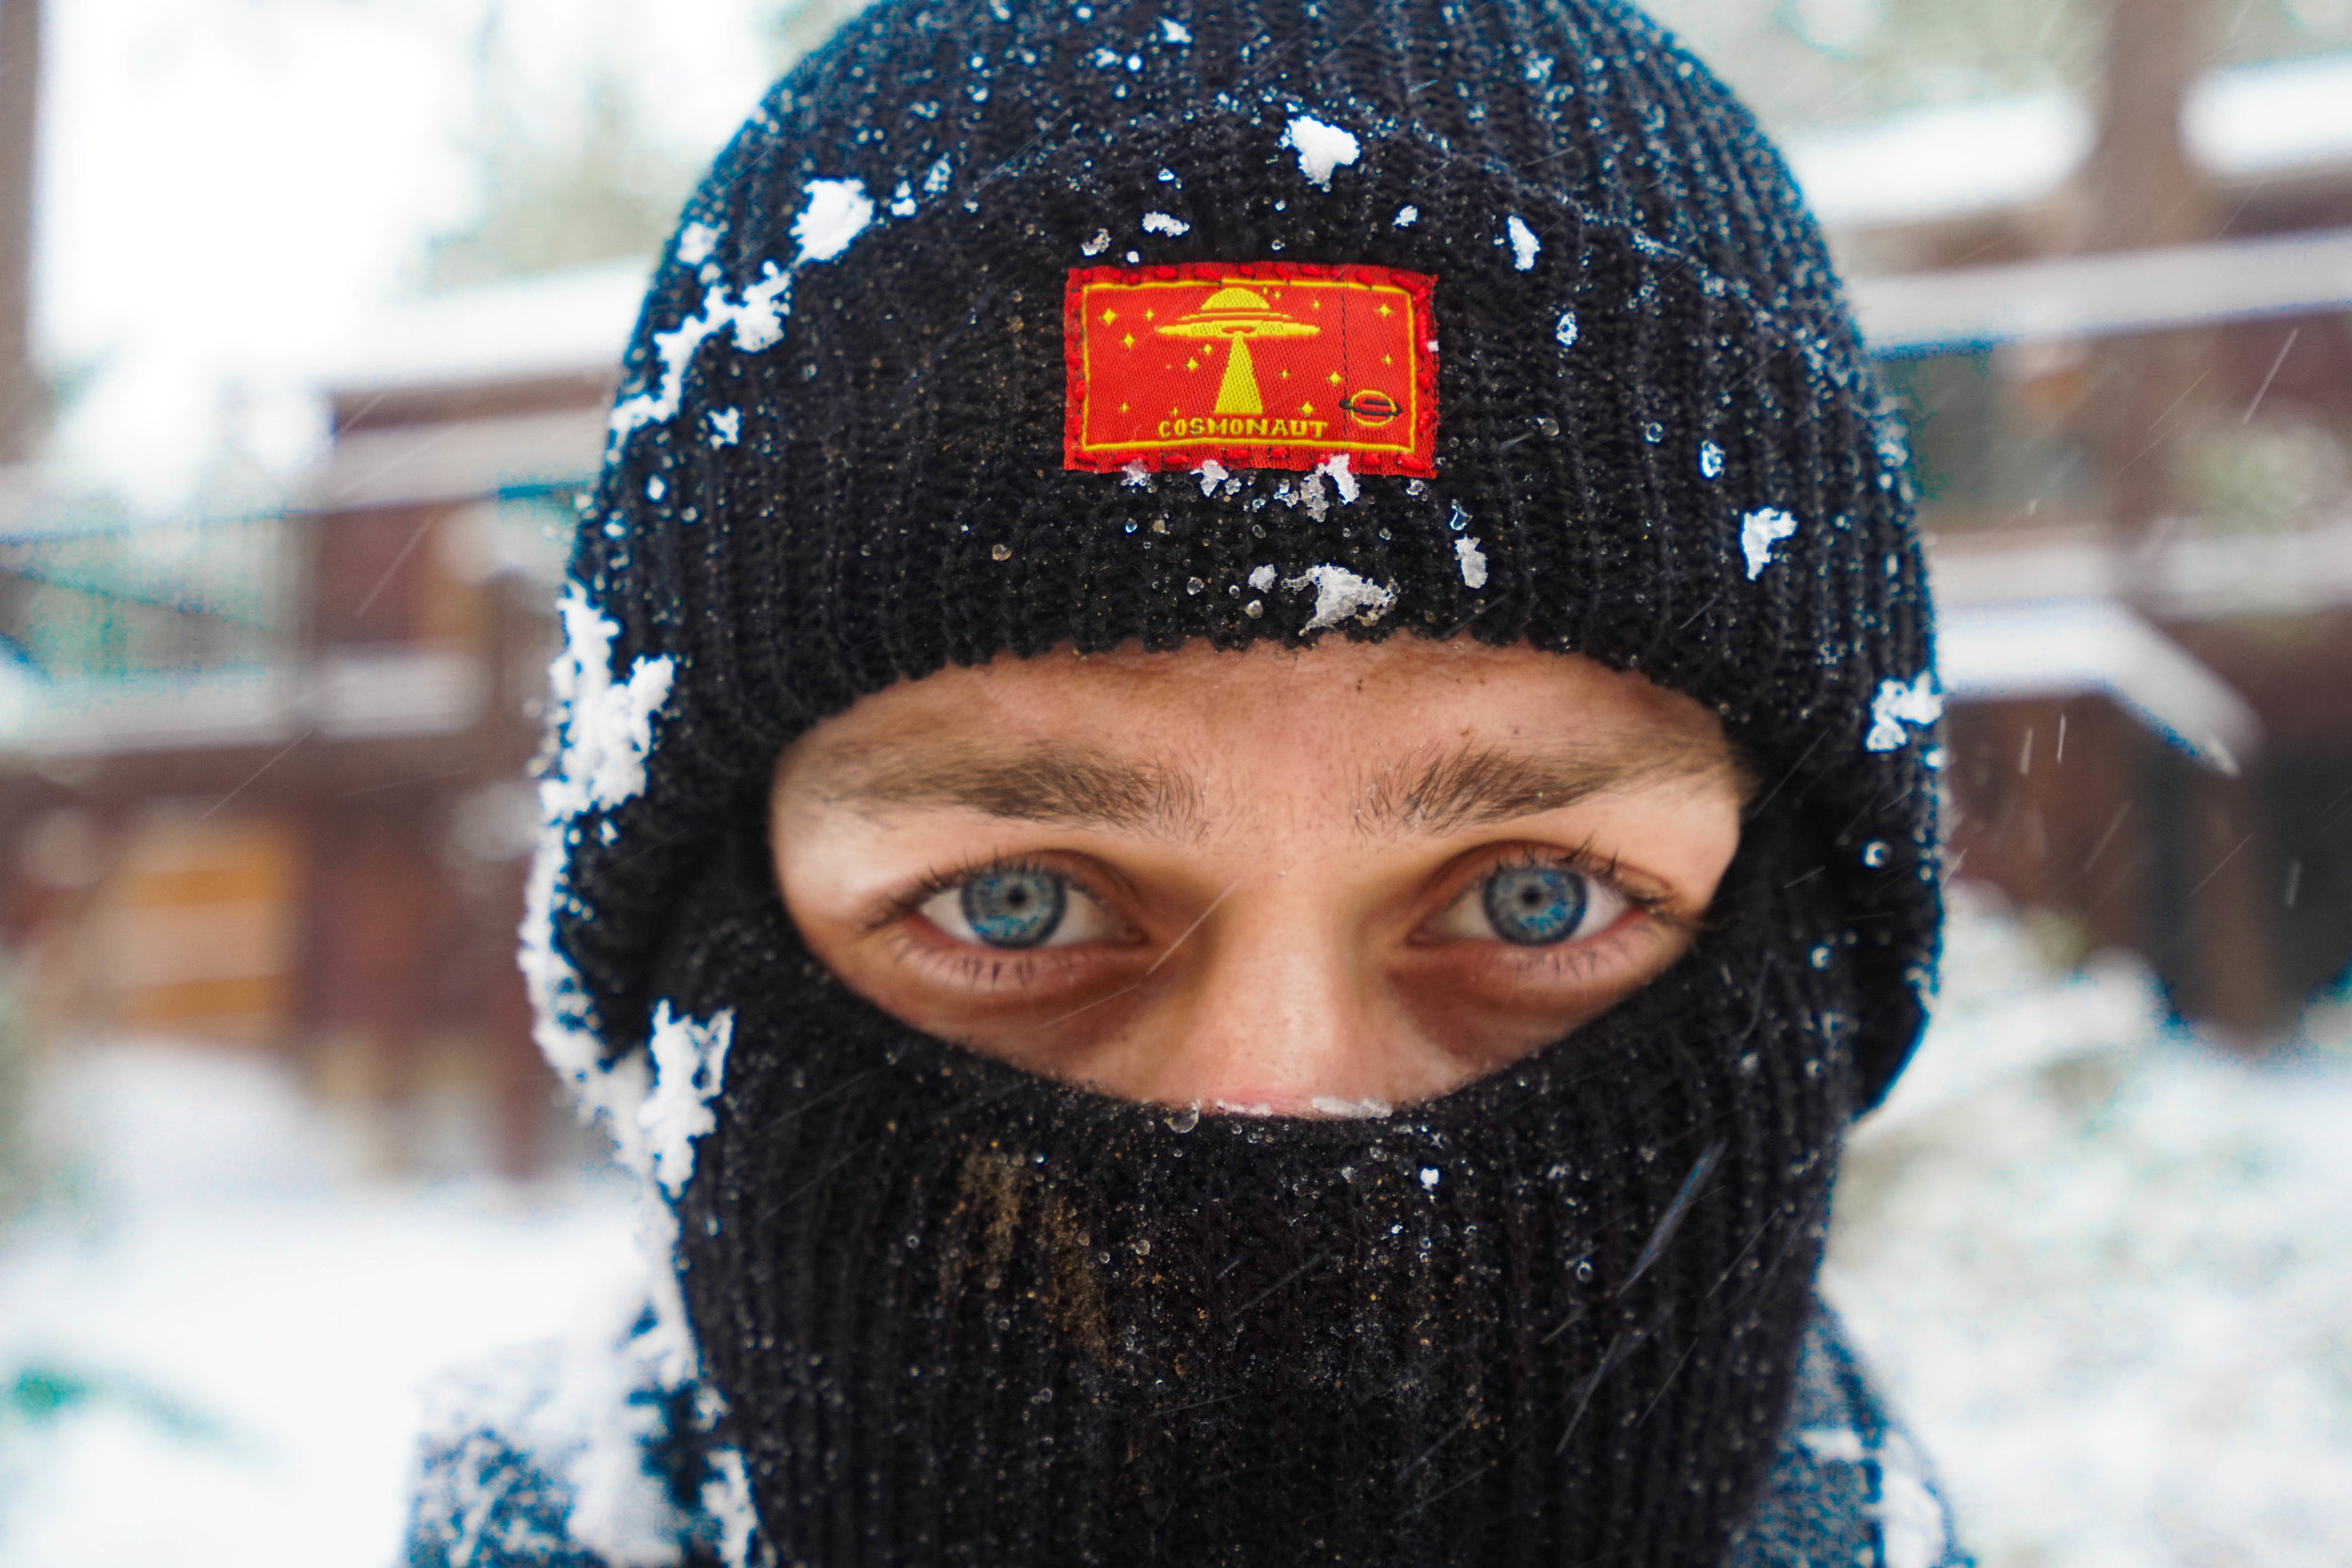 Mountain Man. The "UFO" beanie coupled with the "UFO" face warmer was an equal match for this wintery world.